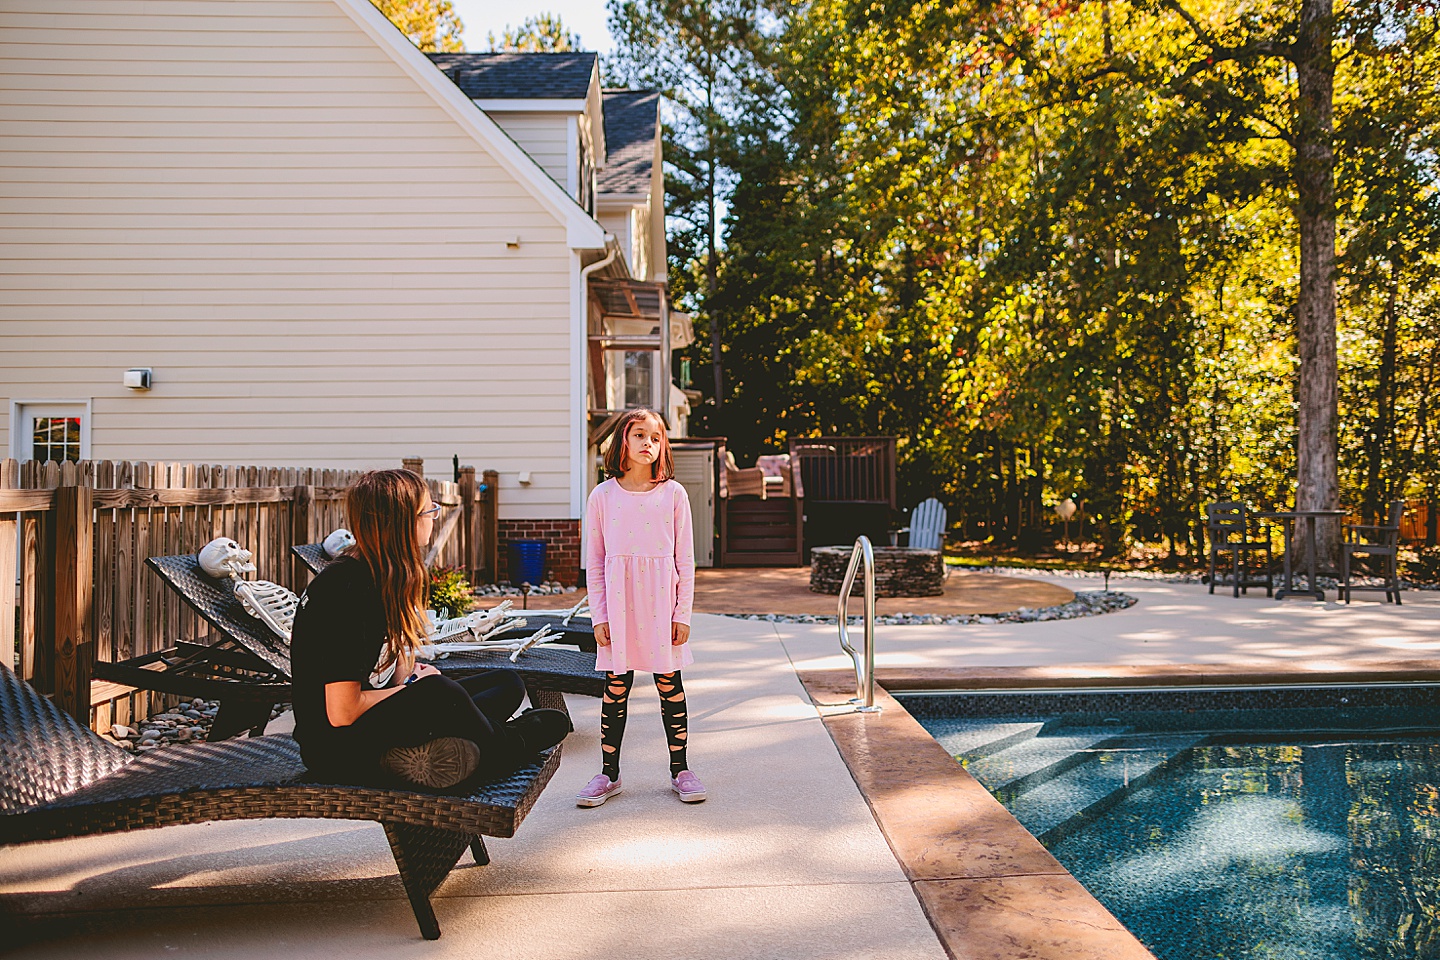 Two sisters hang out by the side of a swimming pool in fall